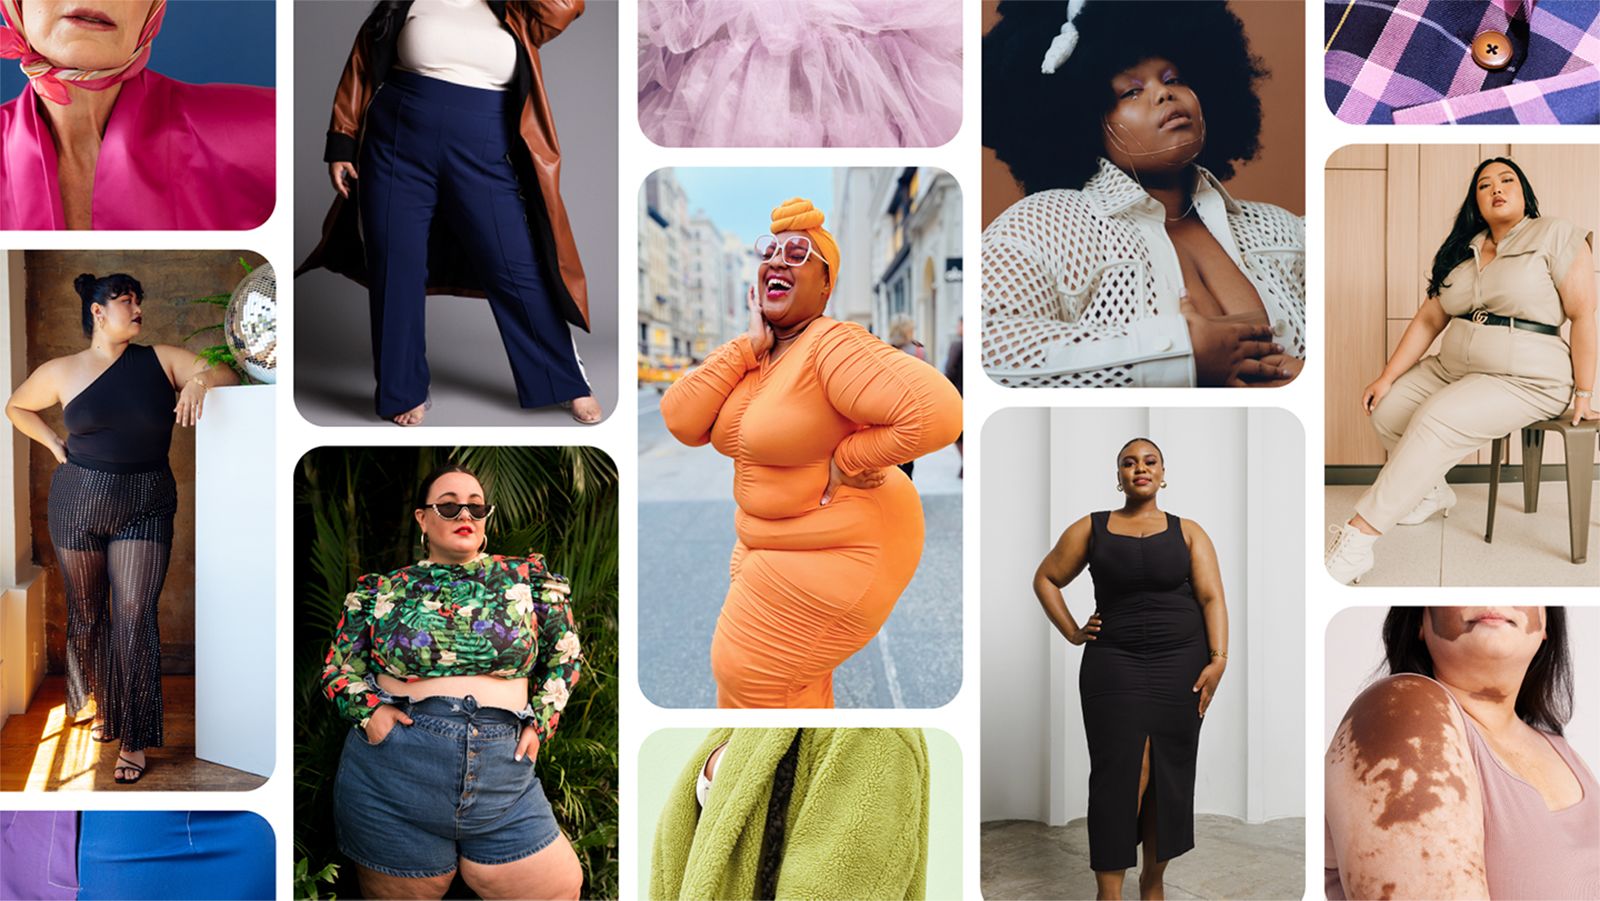 Pinterest and Shapermint prove it pays to be body positive